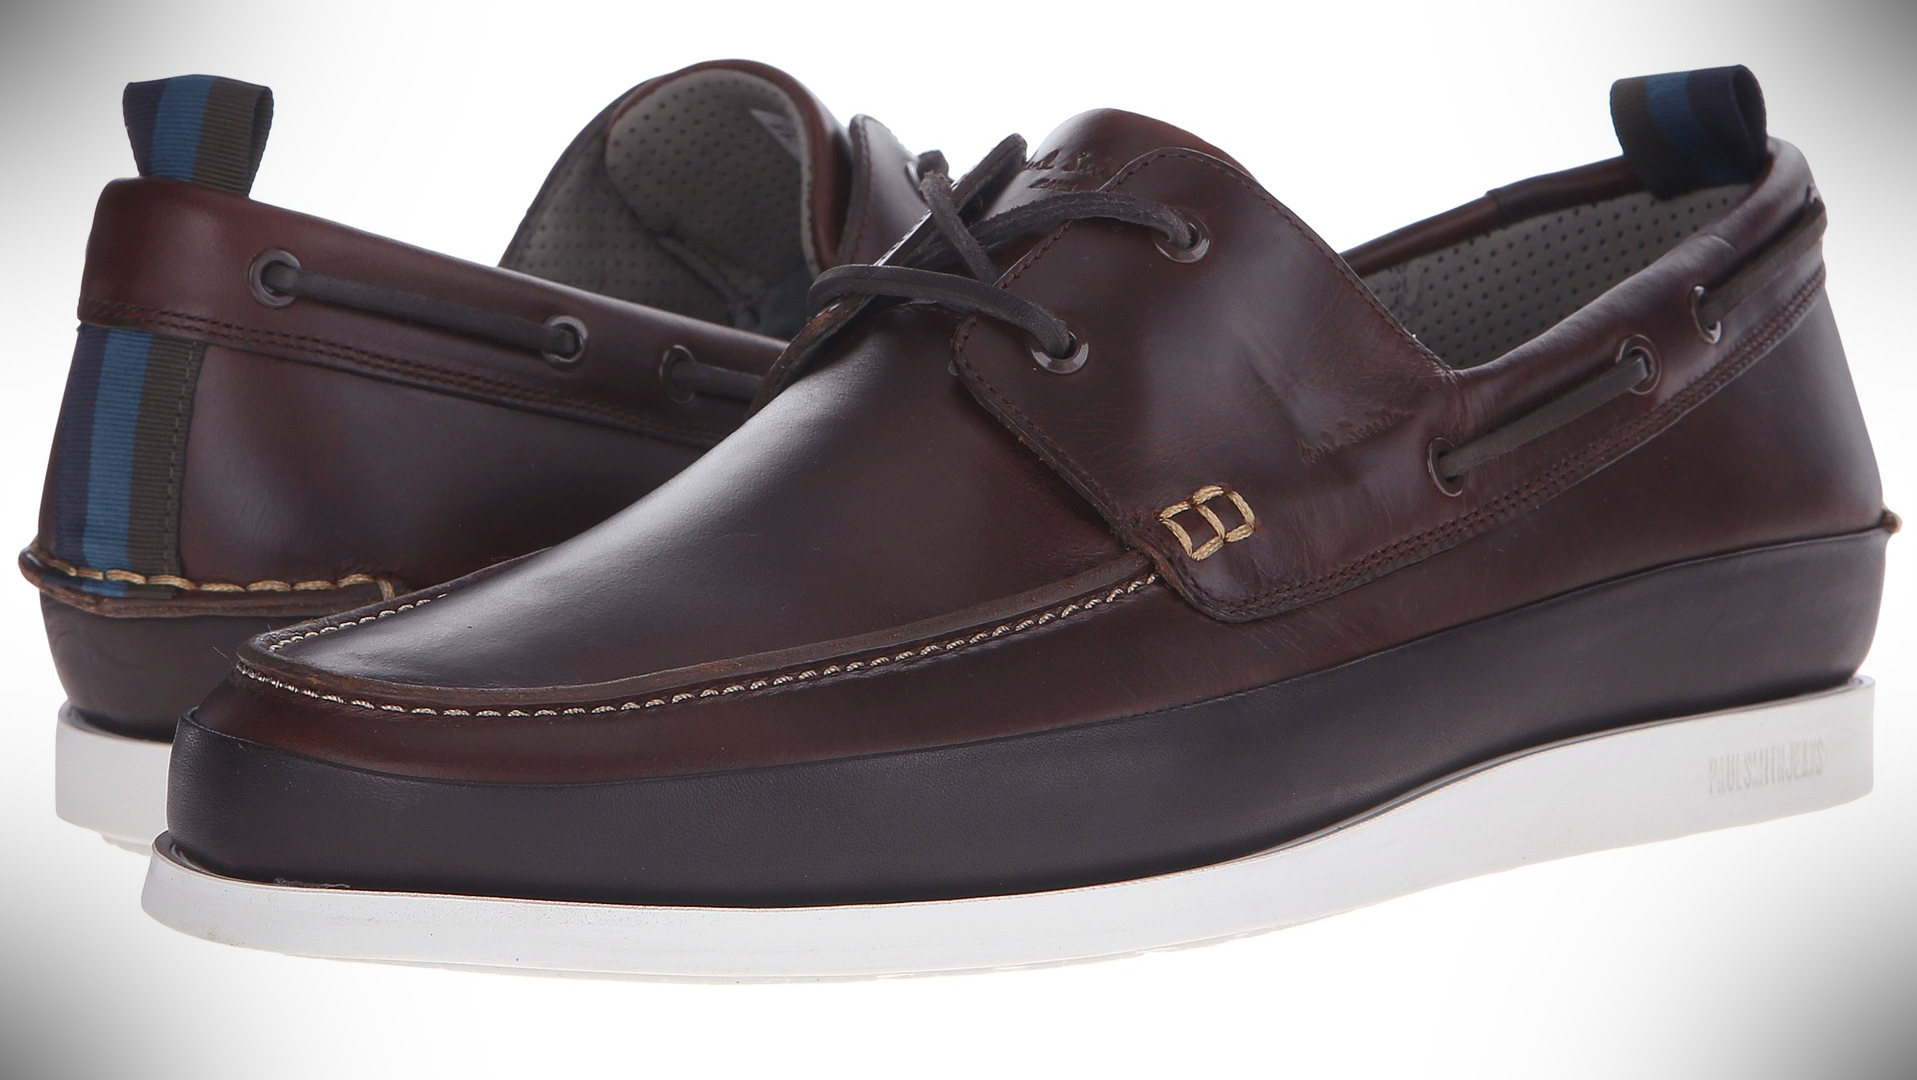 Paul Smith Jeans Branca Scotch - boat shoes that are business casual